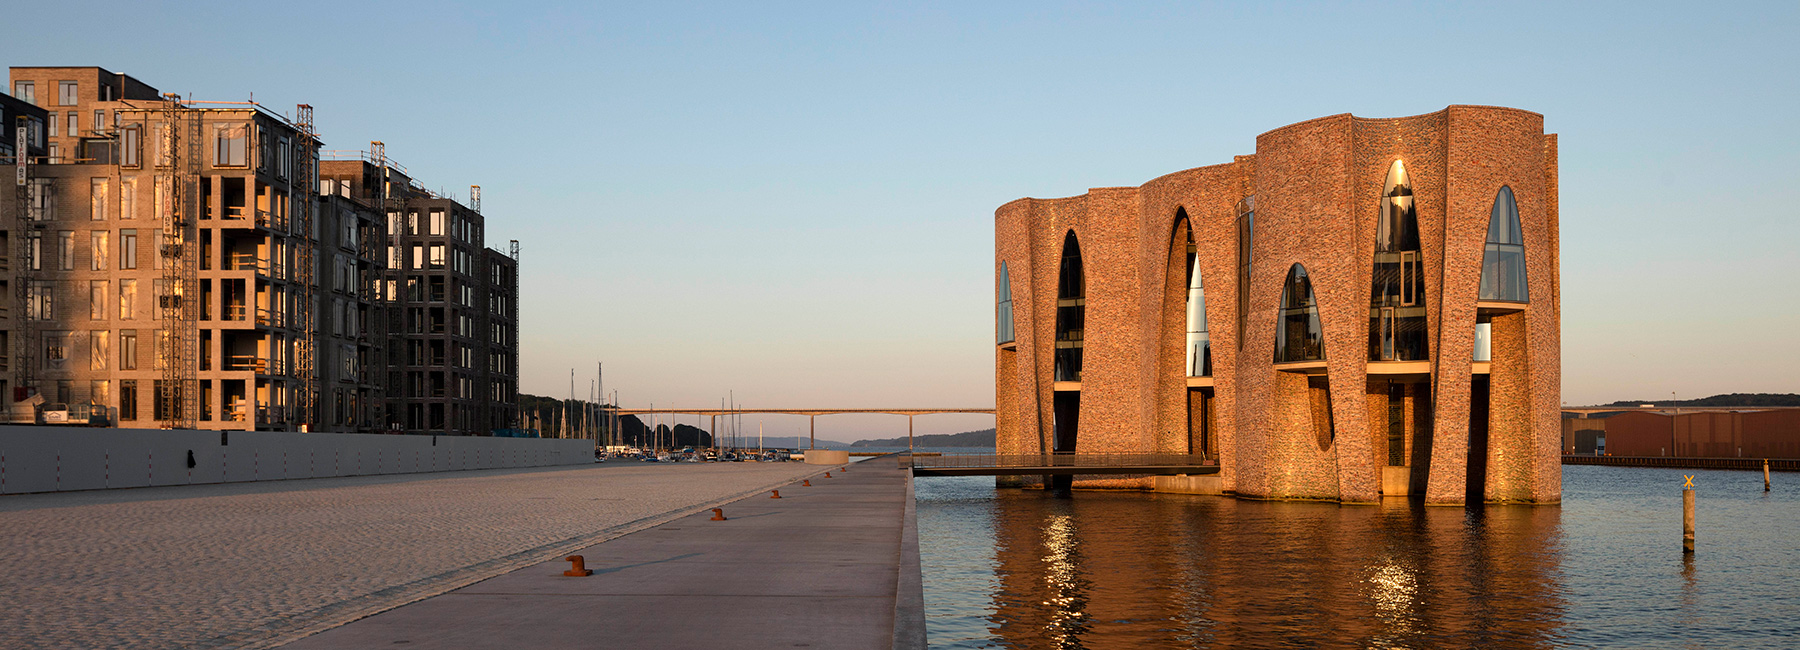 olafur eliasson's first building is a curved brick, semi-submerged scheme in denmark